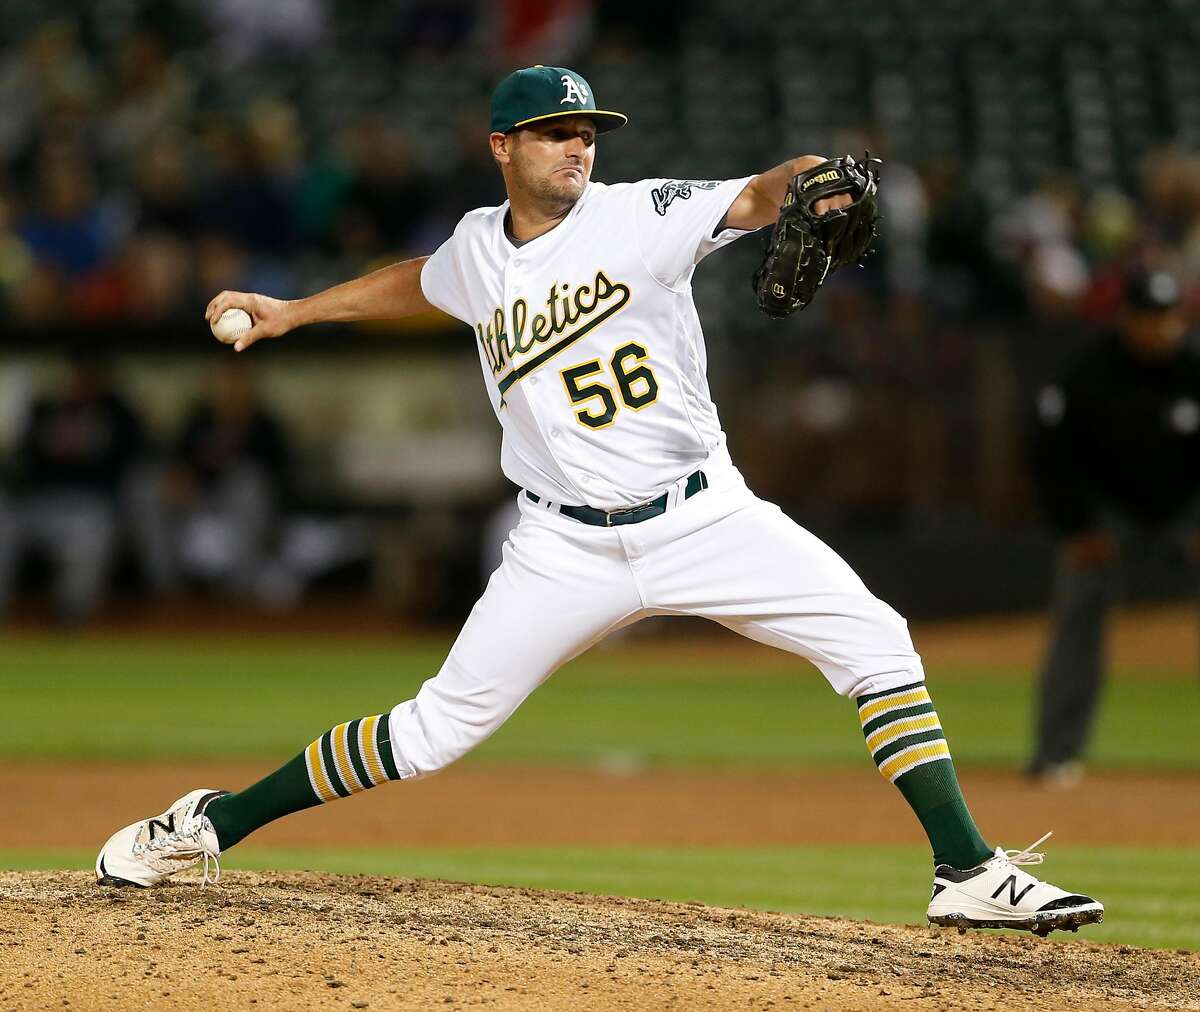 Oakland Athletics' Chris Smith pitches in 9th inning of A's 9-1 win over Cleveland Indians in MLB game at Oakland Coliseum in Oakland, Calif., on Tuesday, August 23, 2016.